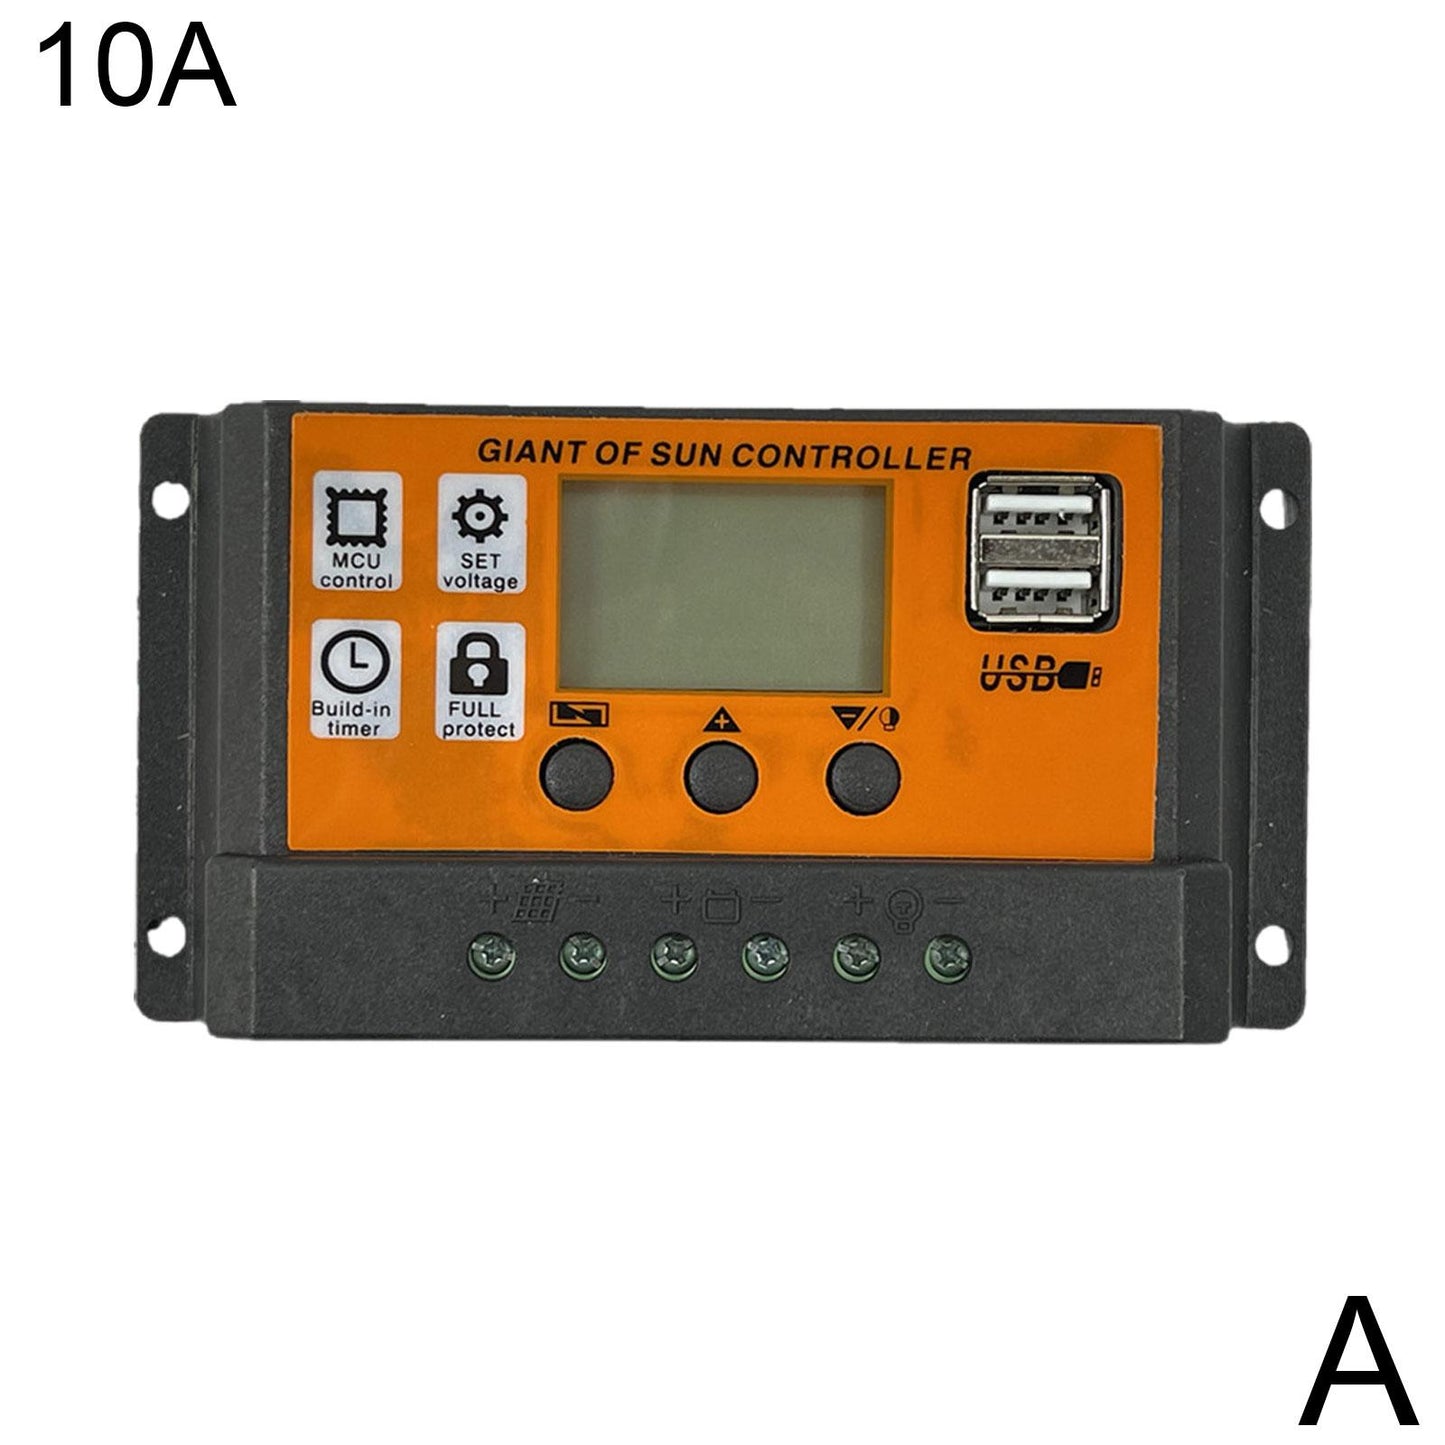 MPPT Solar Charge Controller 10-100A Auto Focus Tracking Battery Solar Regulator Controller Regulator Solar Charge Solar Pa O0T7